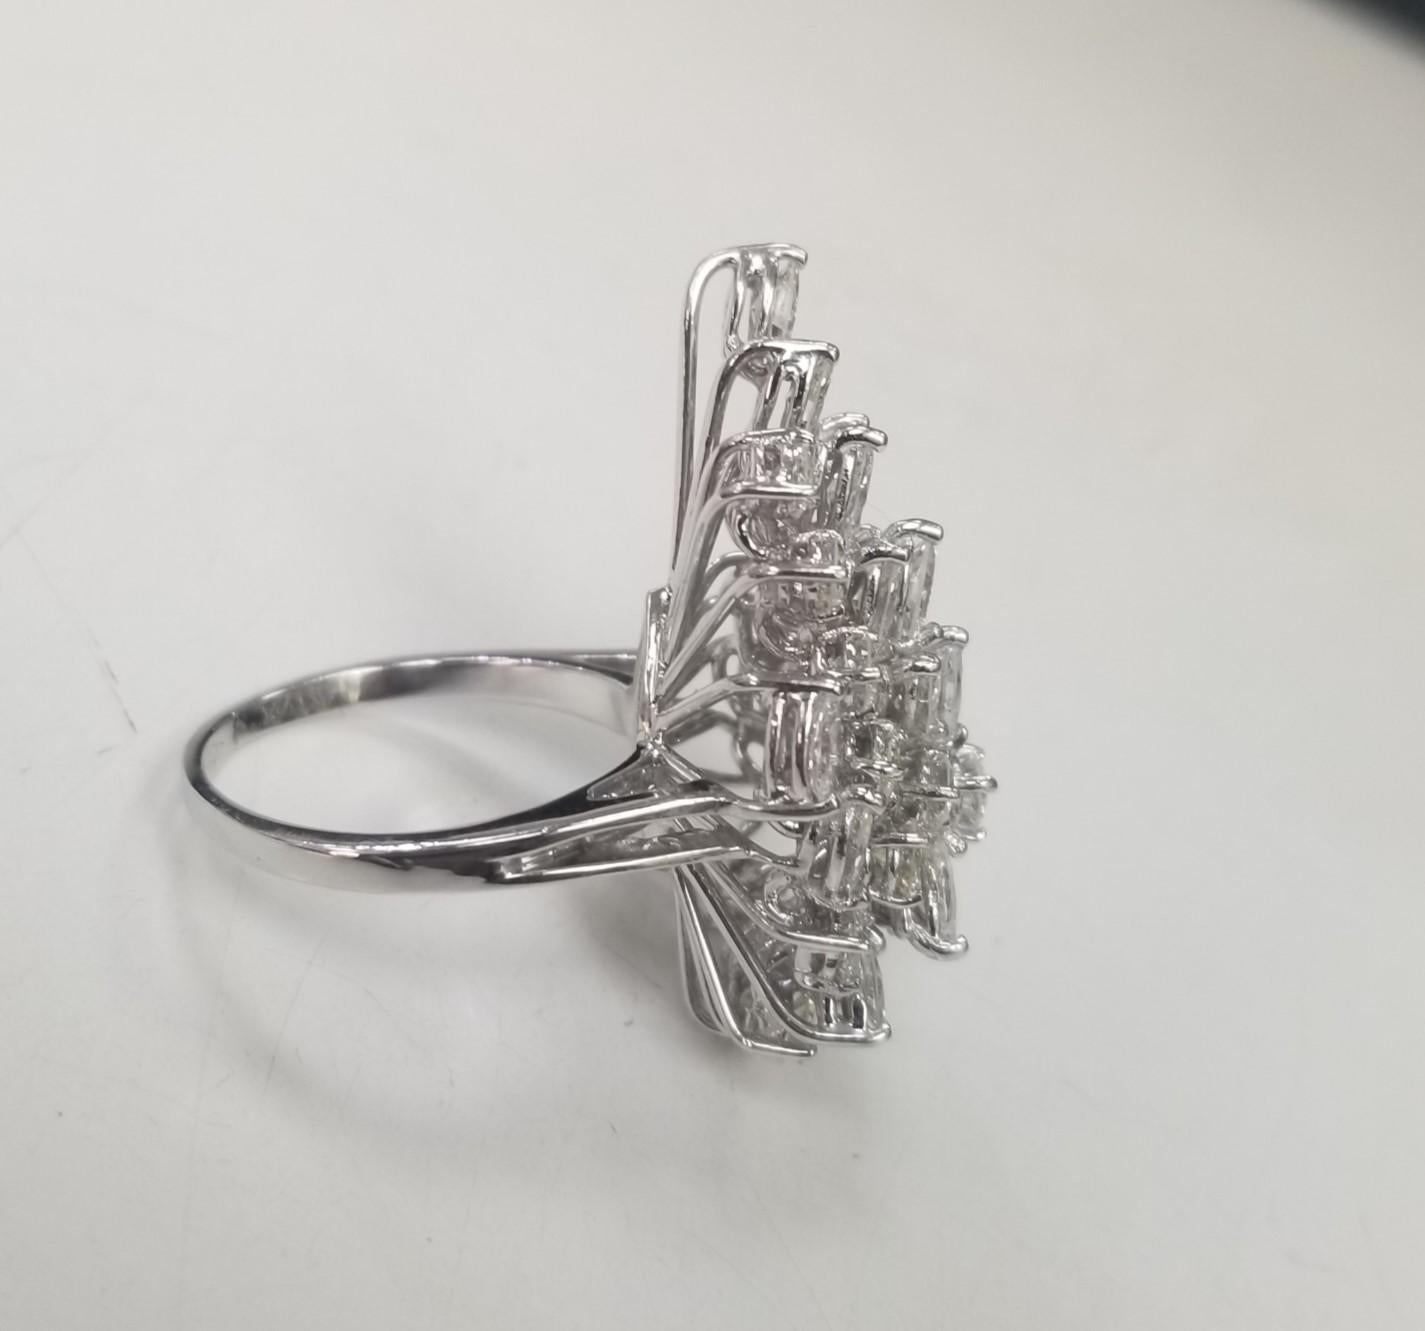 *Motivated to Sell – Please make a Fair Offer*
Specifications: 14k White Gold Hand Made Diamond Cluster Ring 5.10 Carats
Pre-Owned (Great condition, 2 stones are chipped - you can see it only in a loupe)
Metal: 14K White Gold
Weight: 13.3Gr
Main